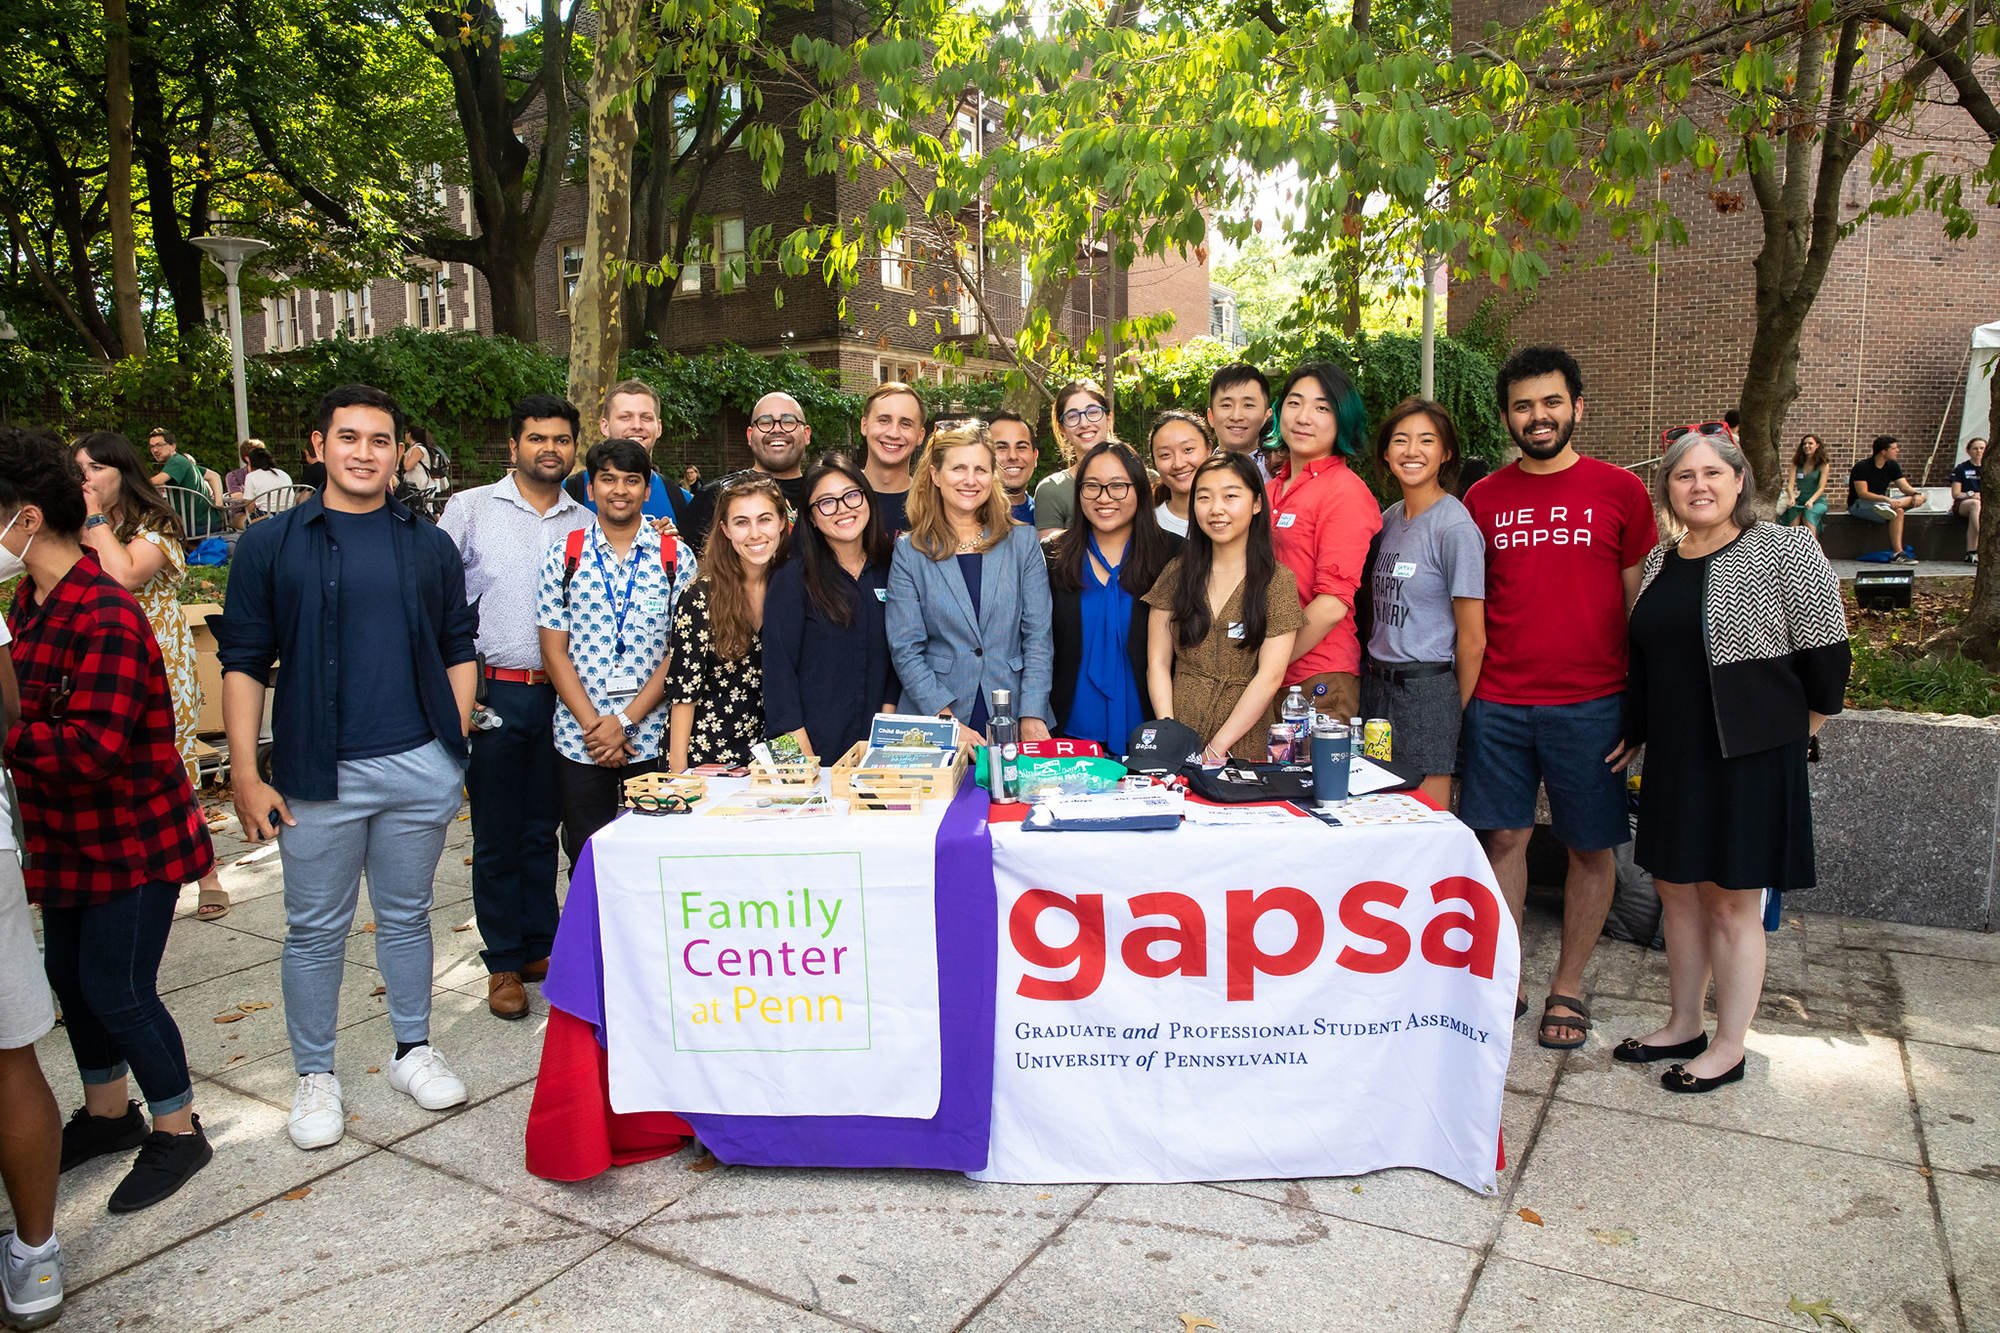 Penn President Liz Magill stands with a large group of graduate and professional students at the GAPSA and Penn Family Center at Penn tables on Penn’s campus.